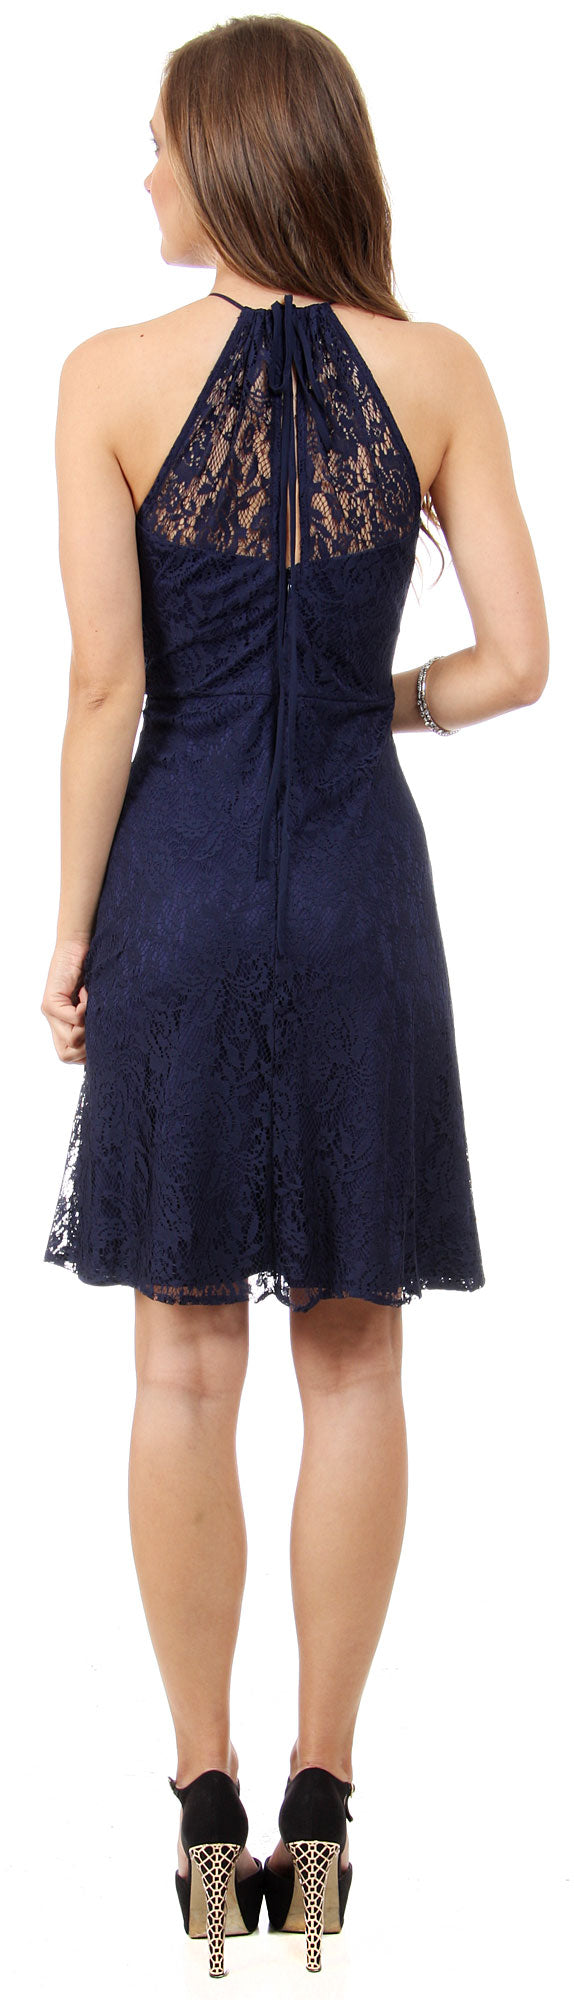 Image of Halter Neck Floral Lace Short Bridesmaid Party Dress back in Navy